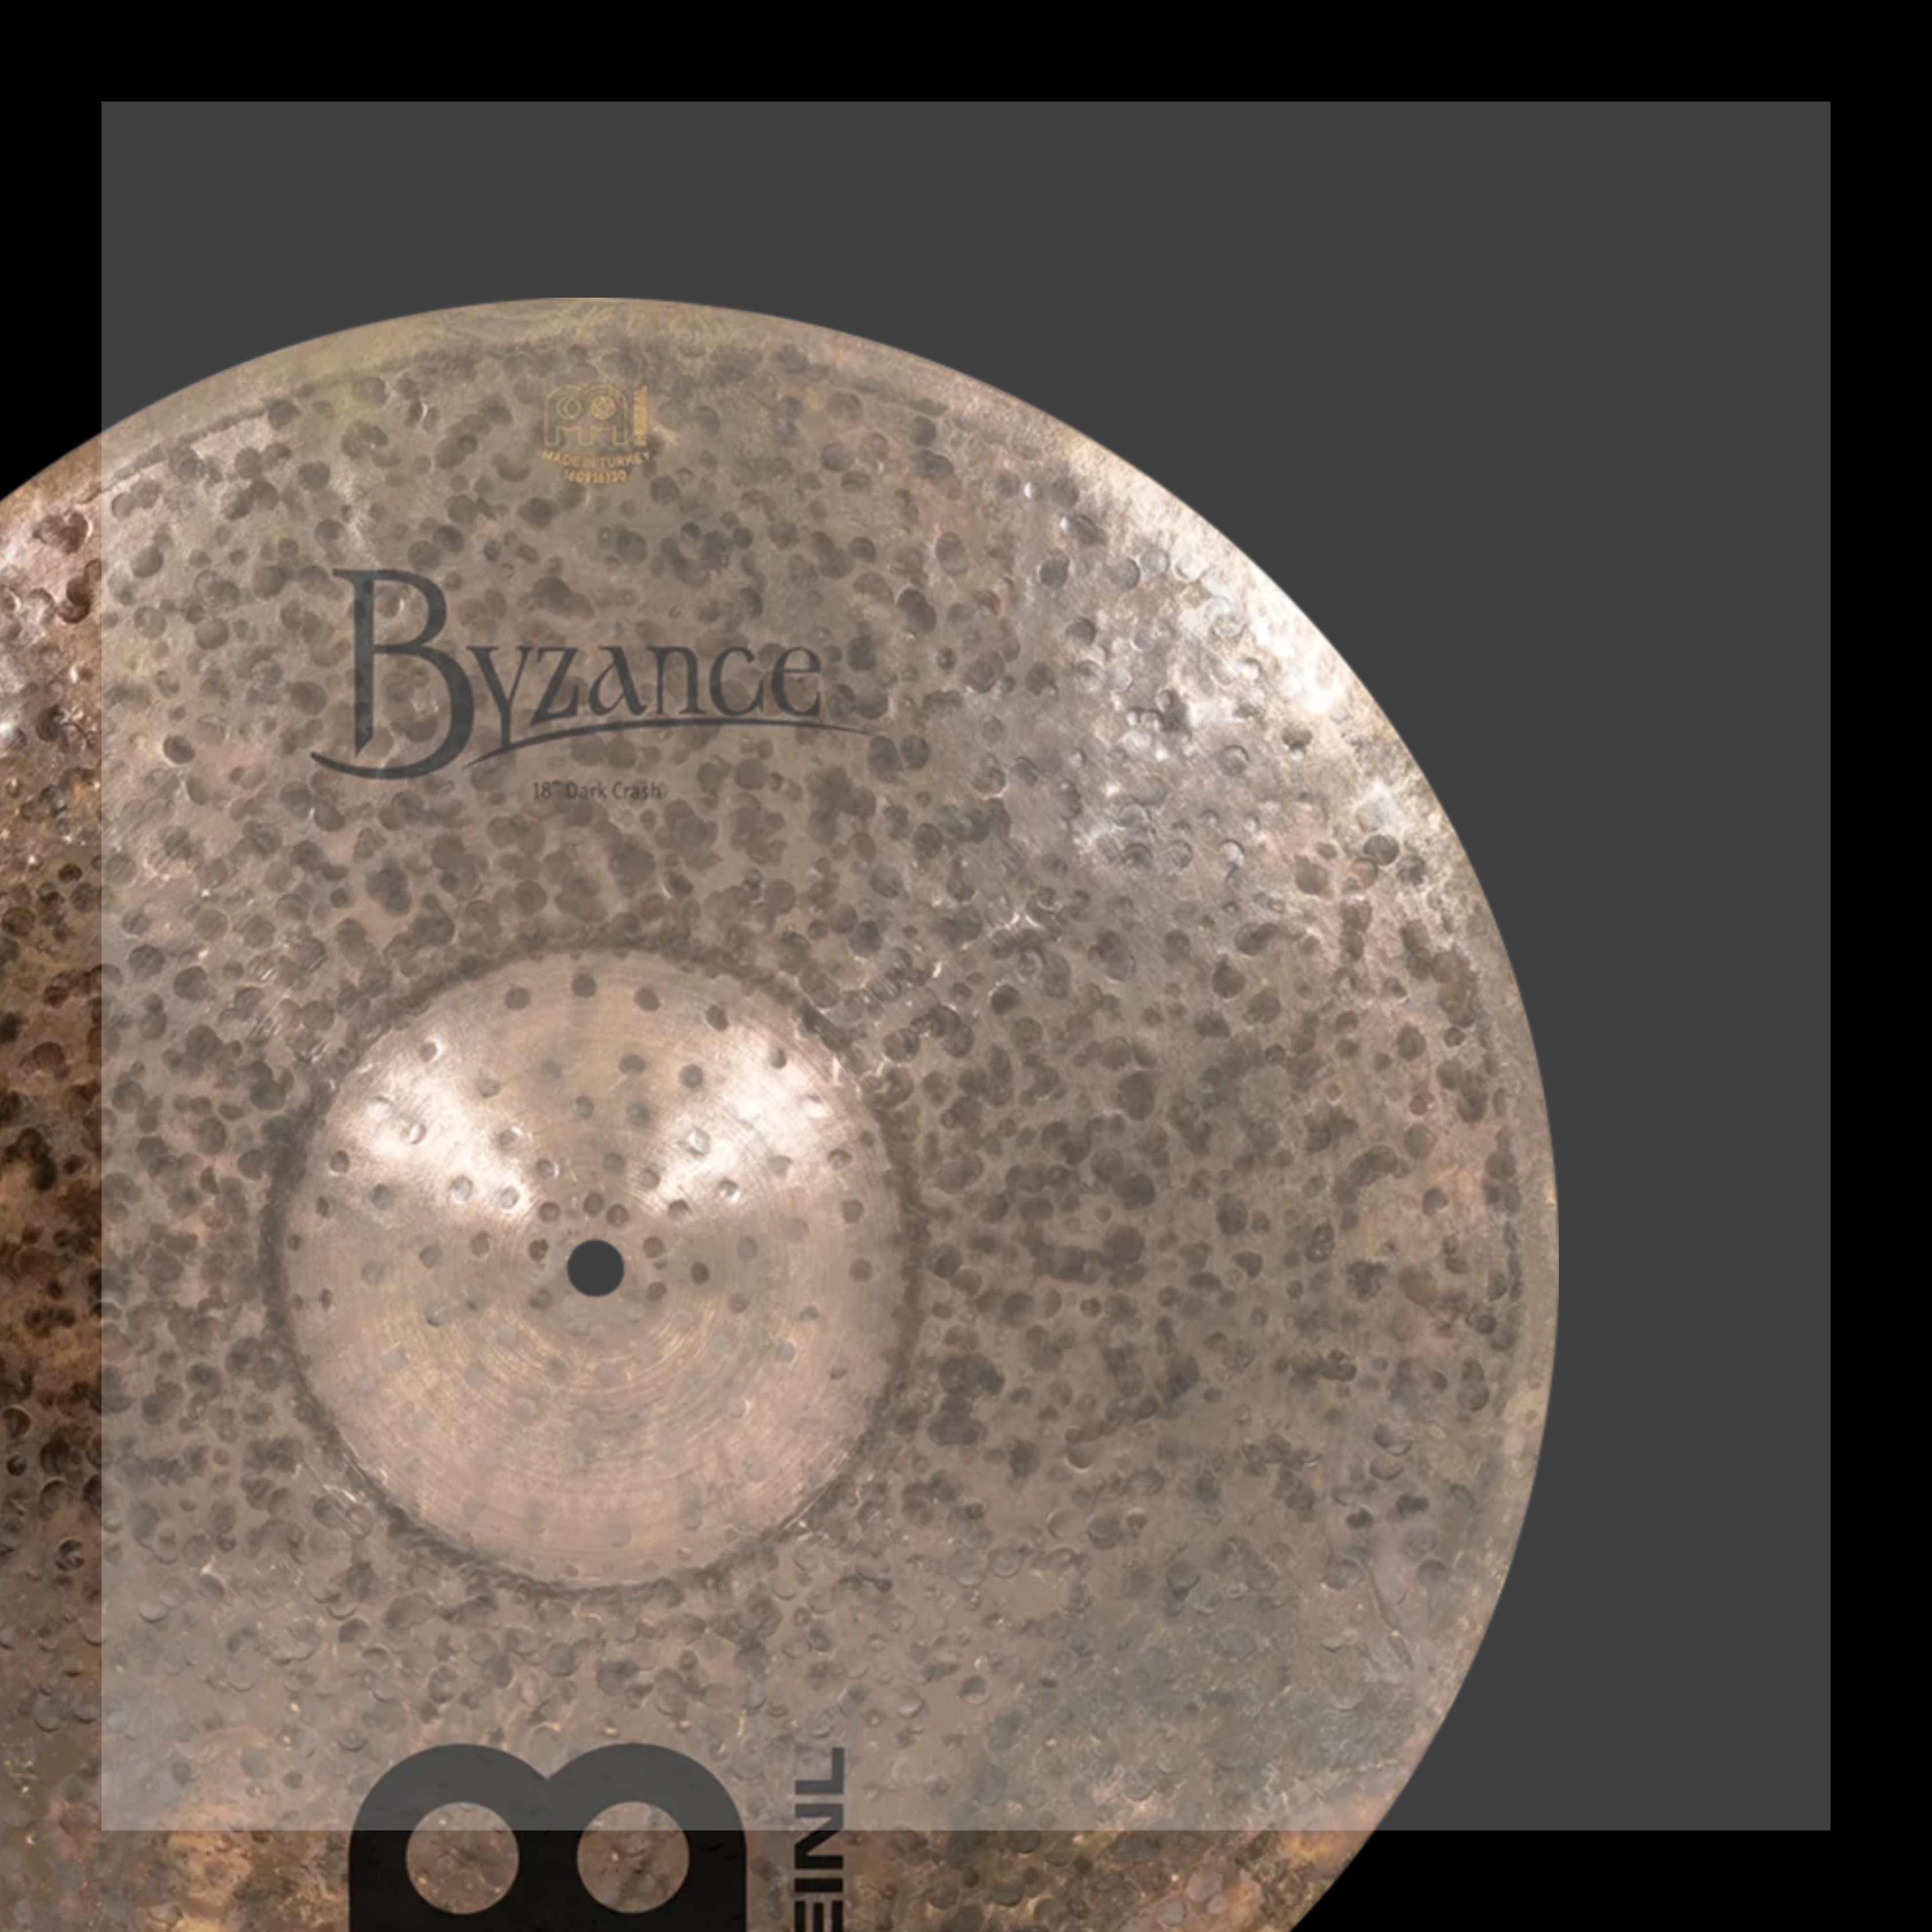 Byzance Dark Cymbals At Into Music – Into Music Store